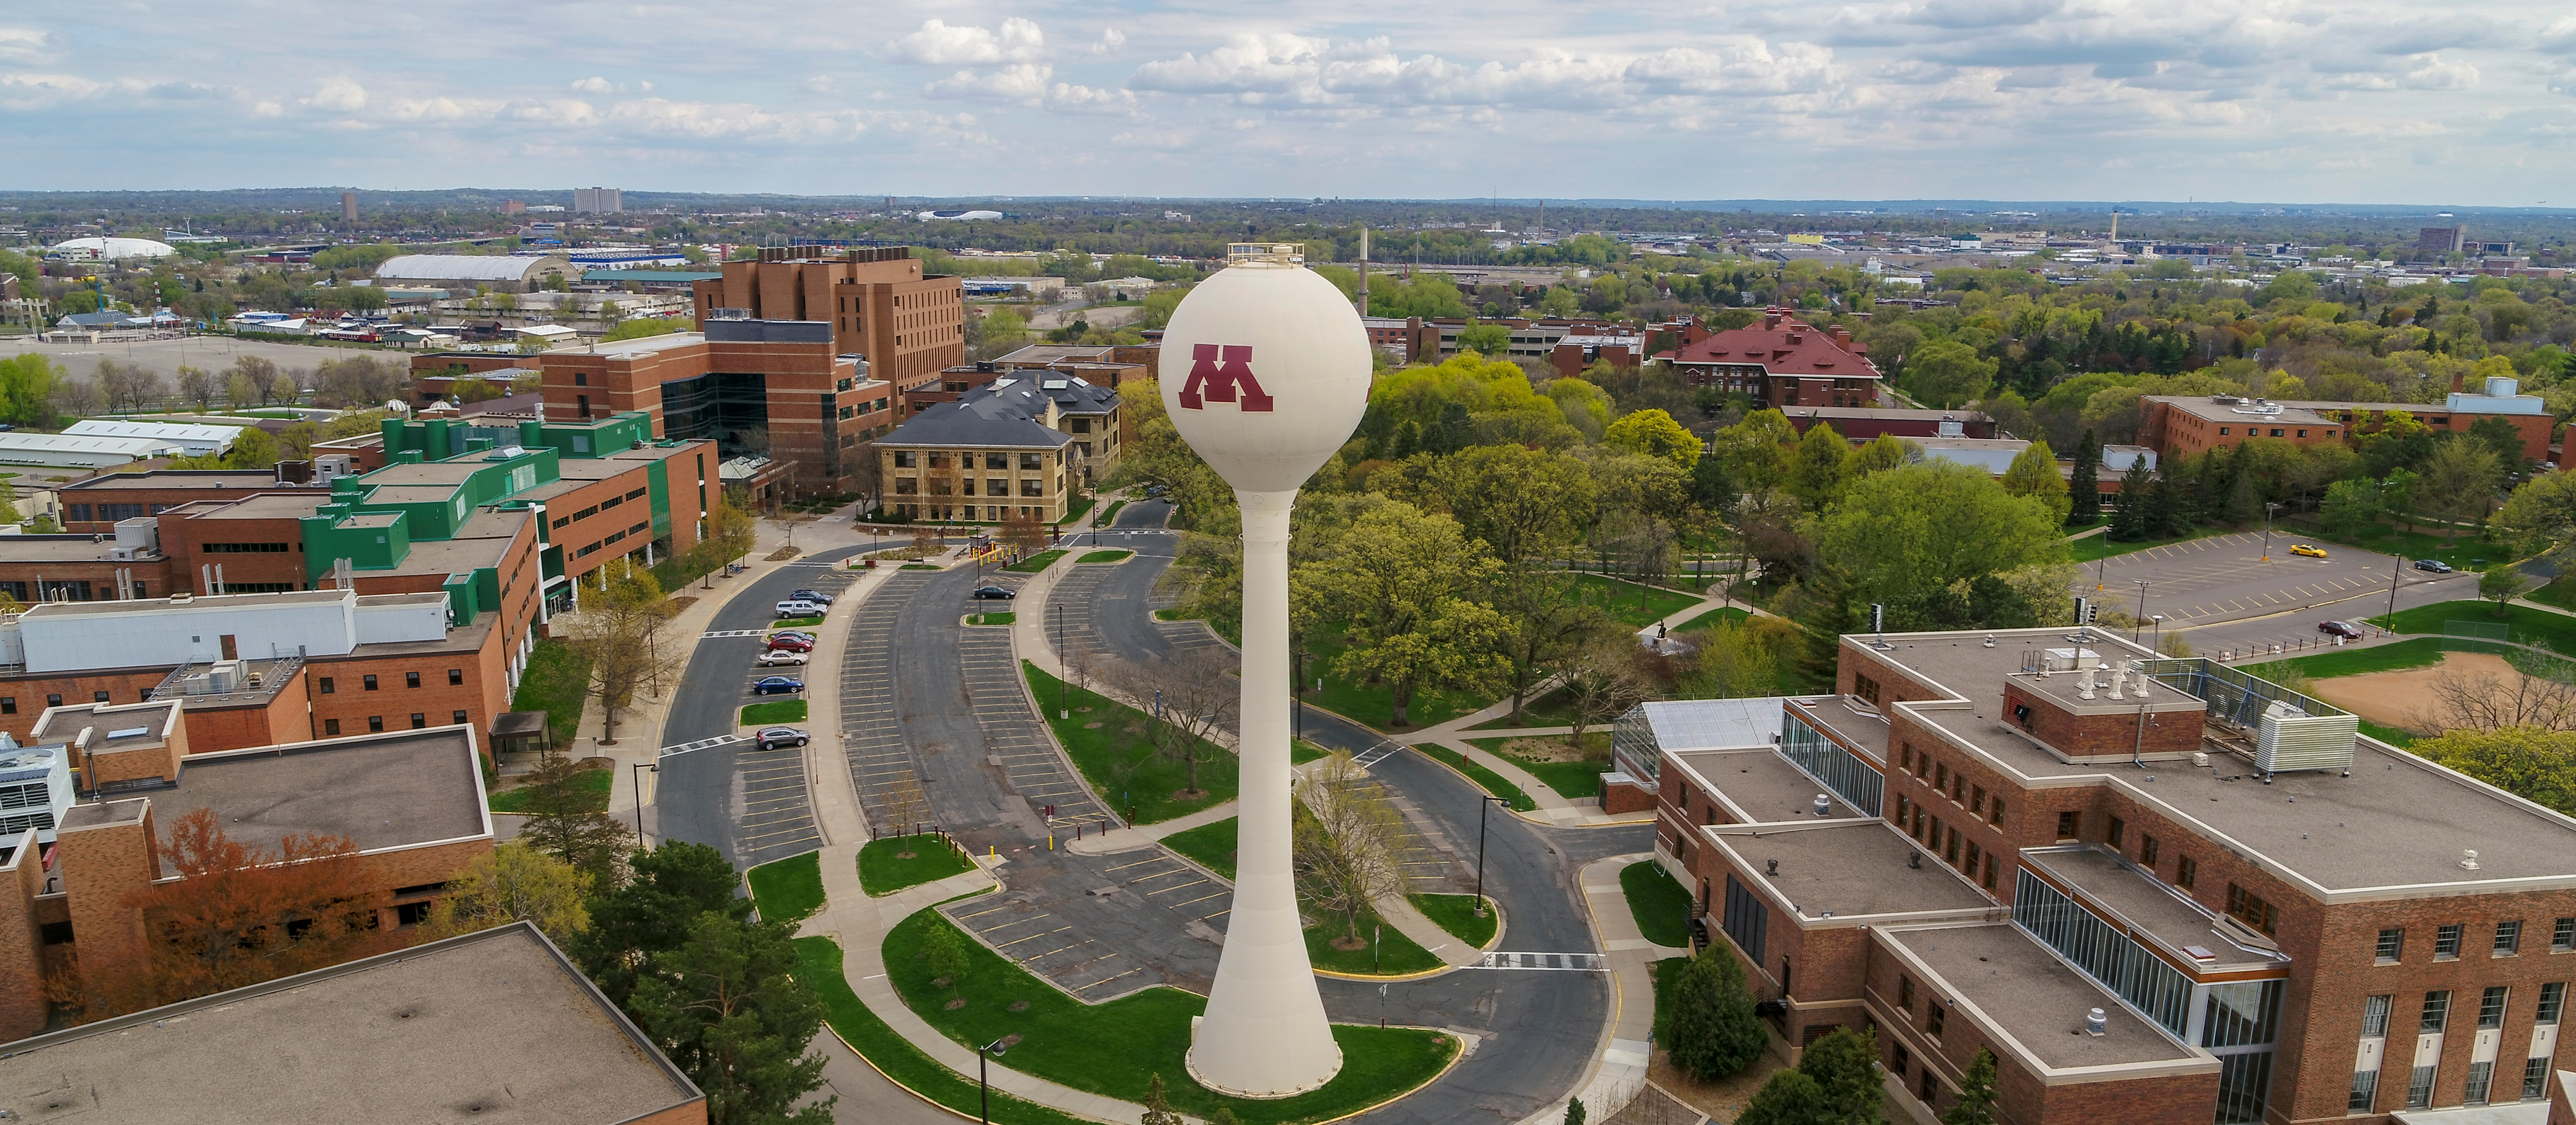 An aerial view of buildings surrounding a water tower with a maroon "M" on it